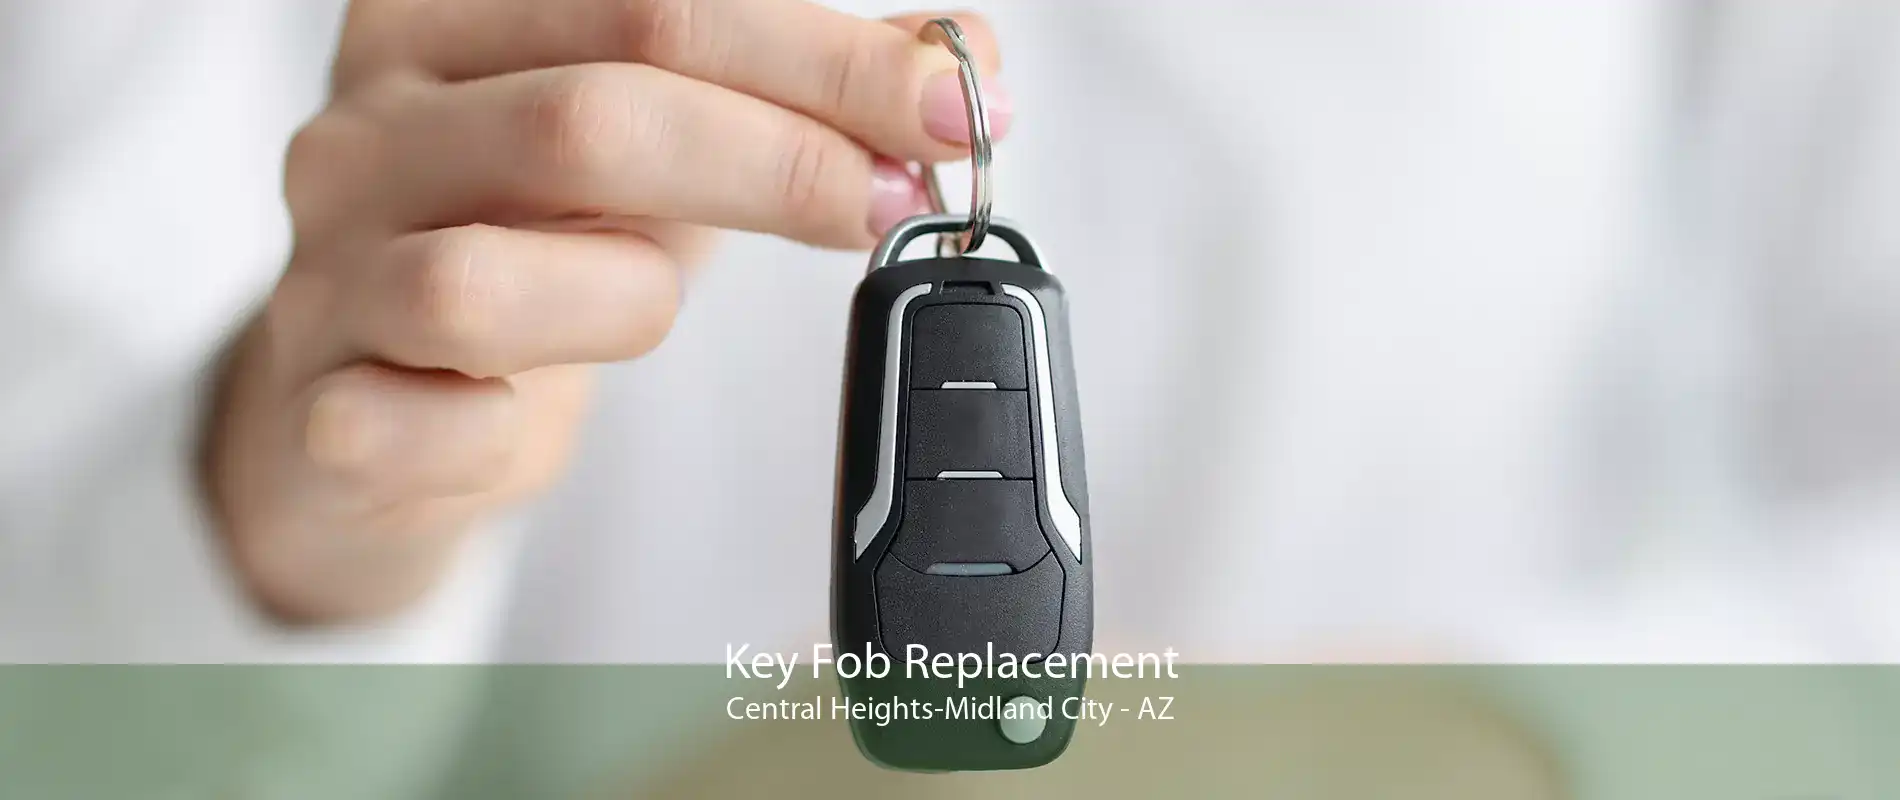 Key Fob Replacement Central Heights-Midland City - AZ